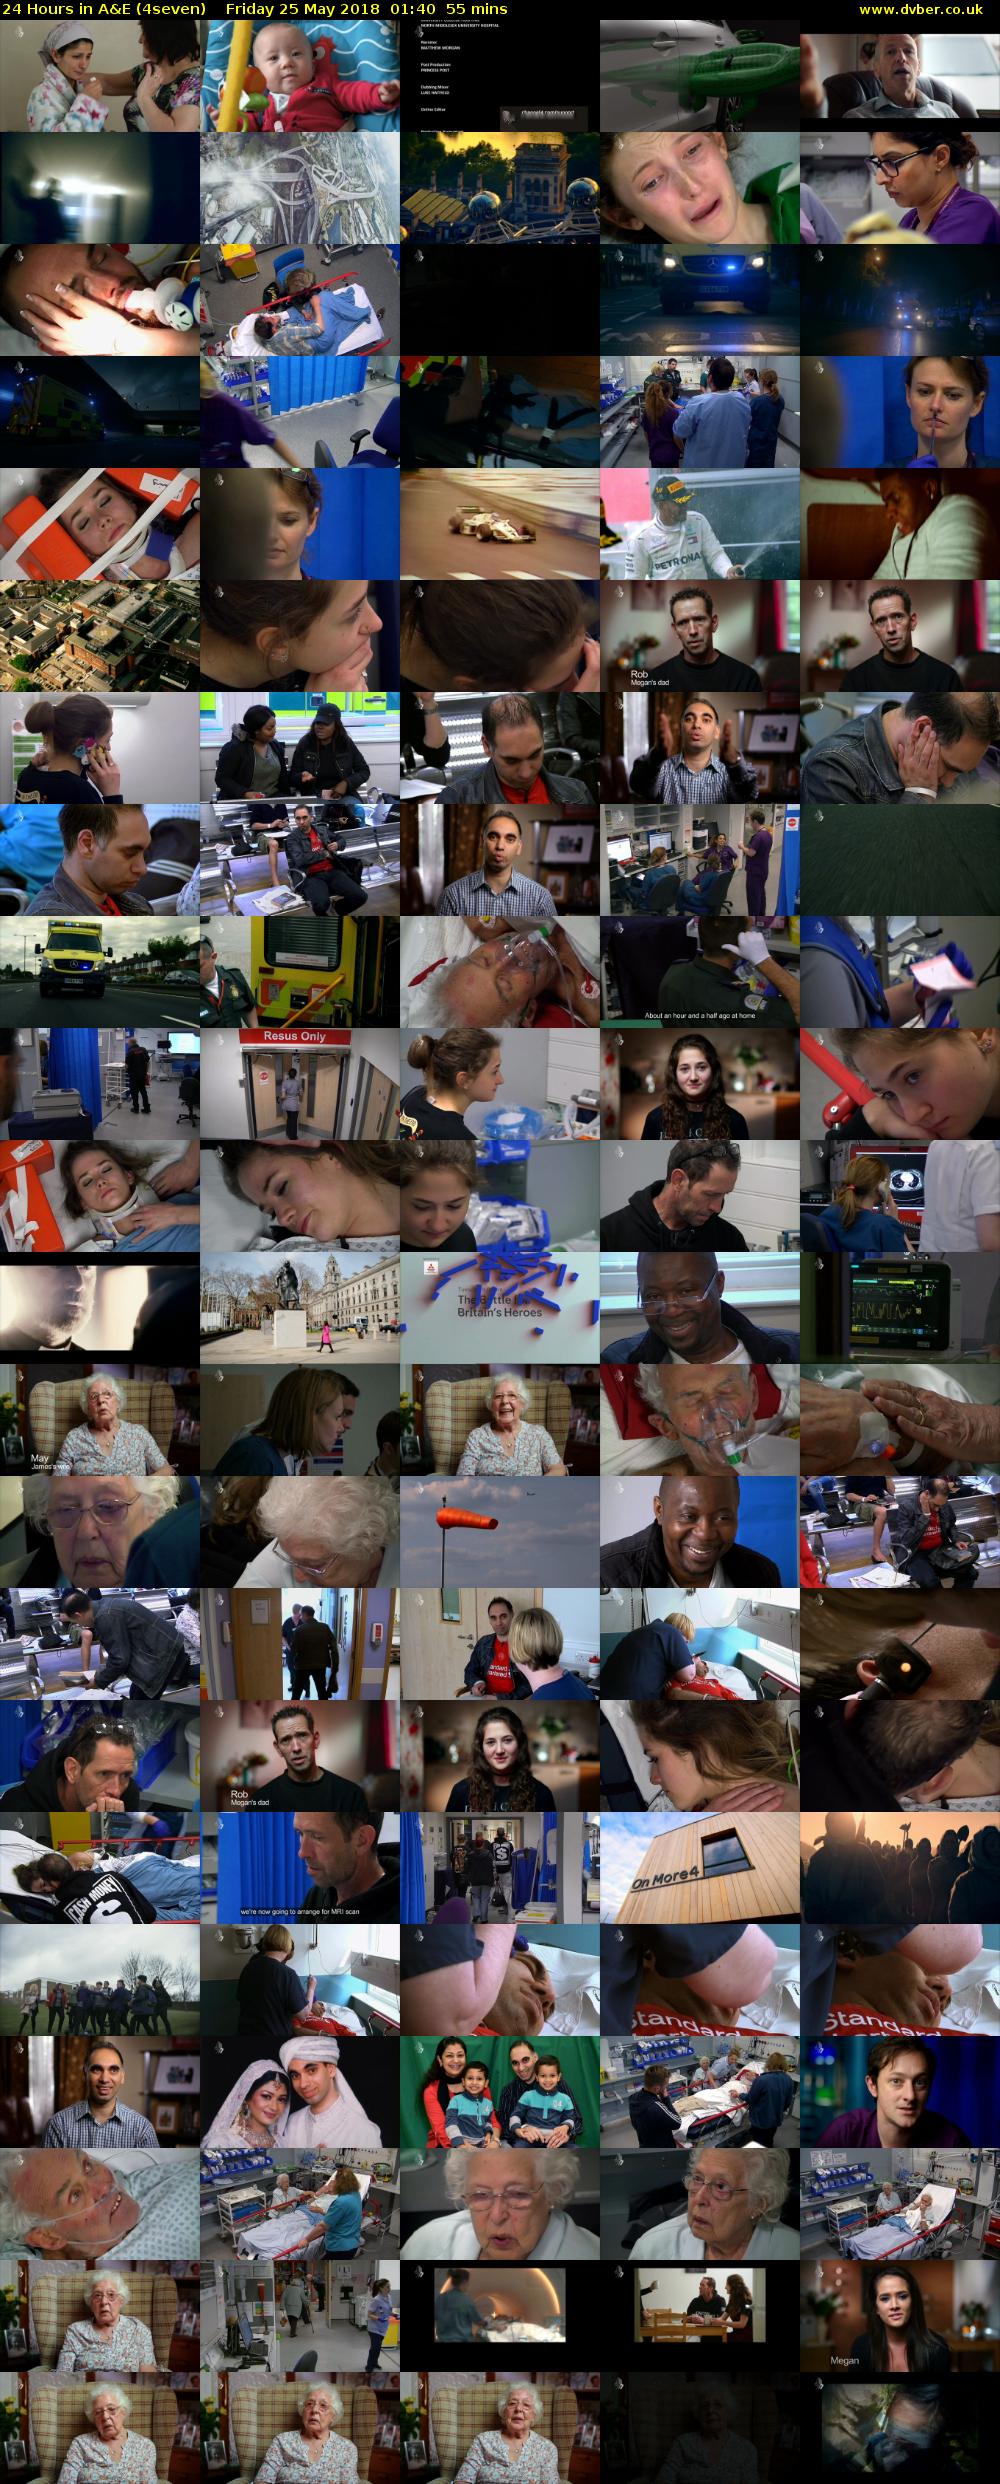 24 Hours in A&E (4seven) Friday 25 May 2018 01:40 - 02:35